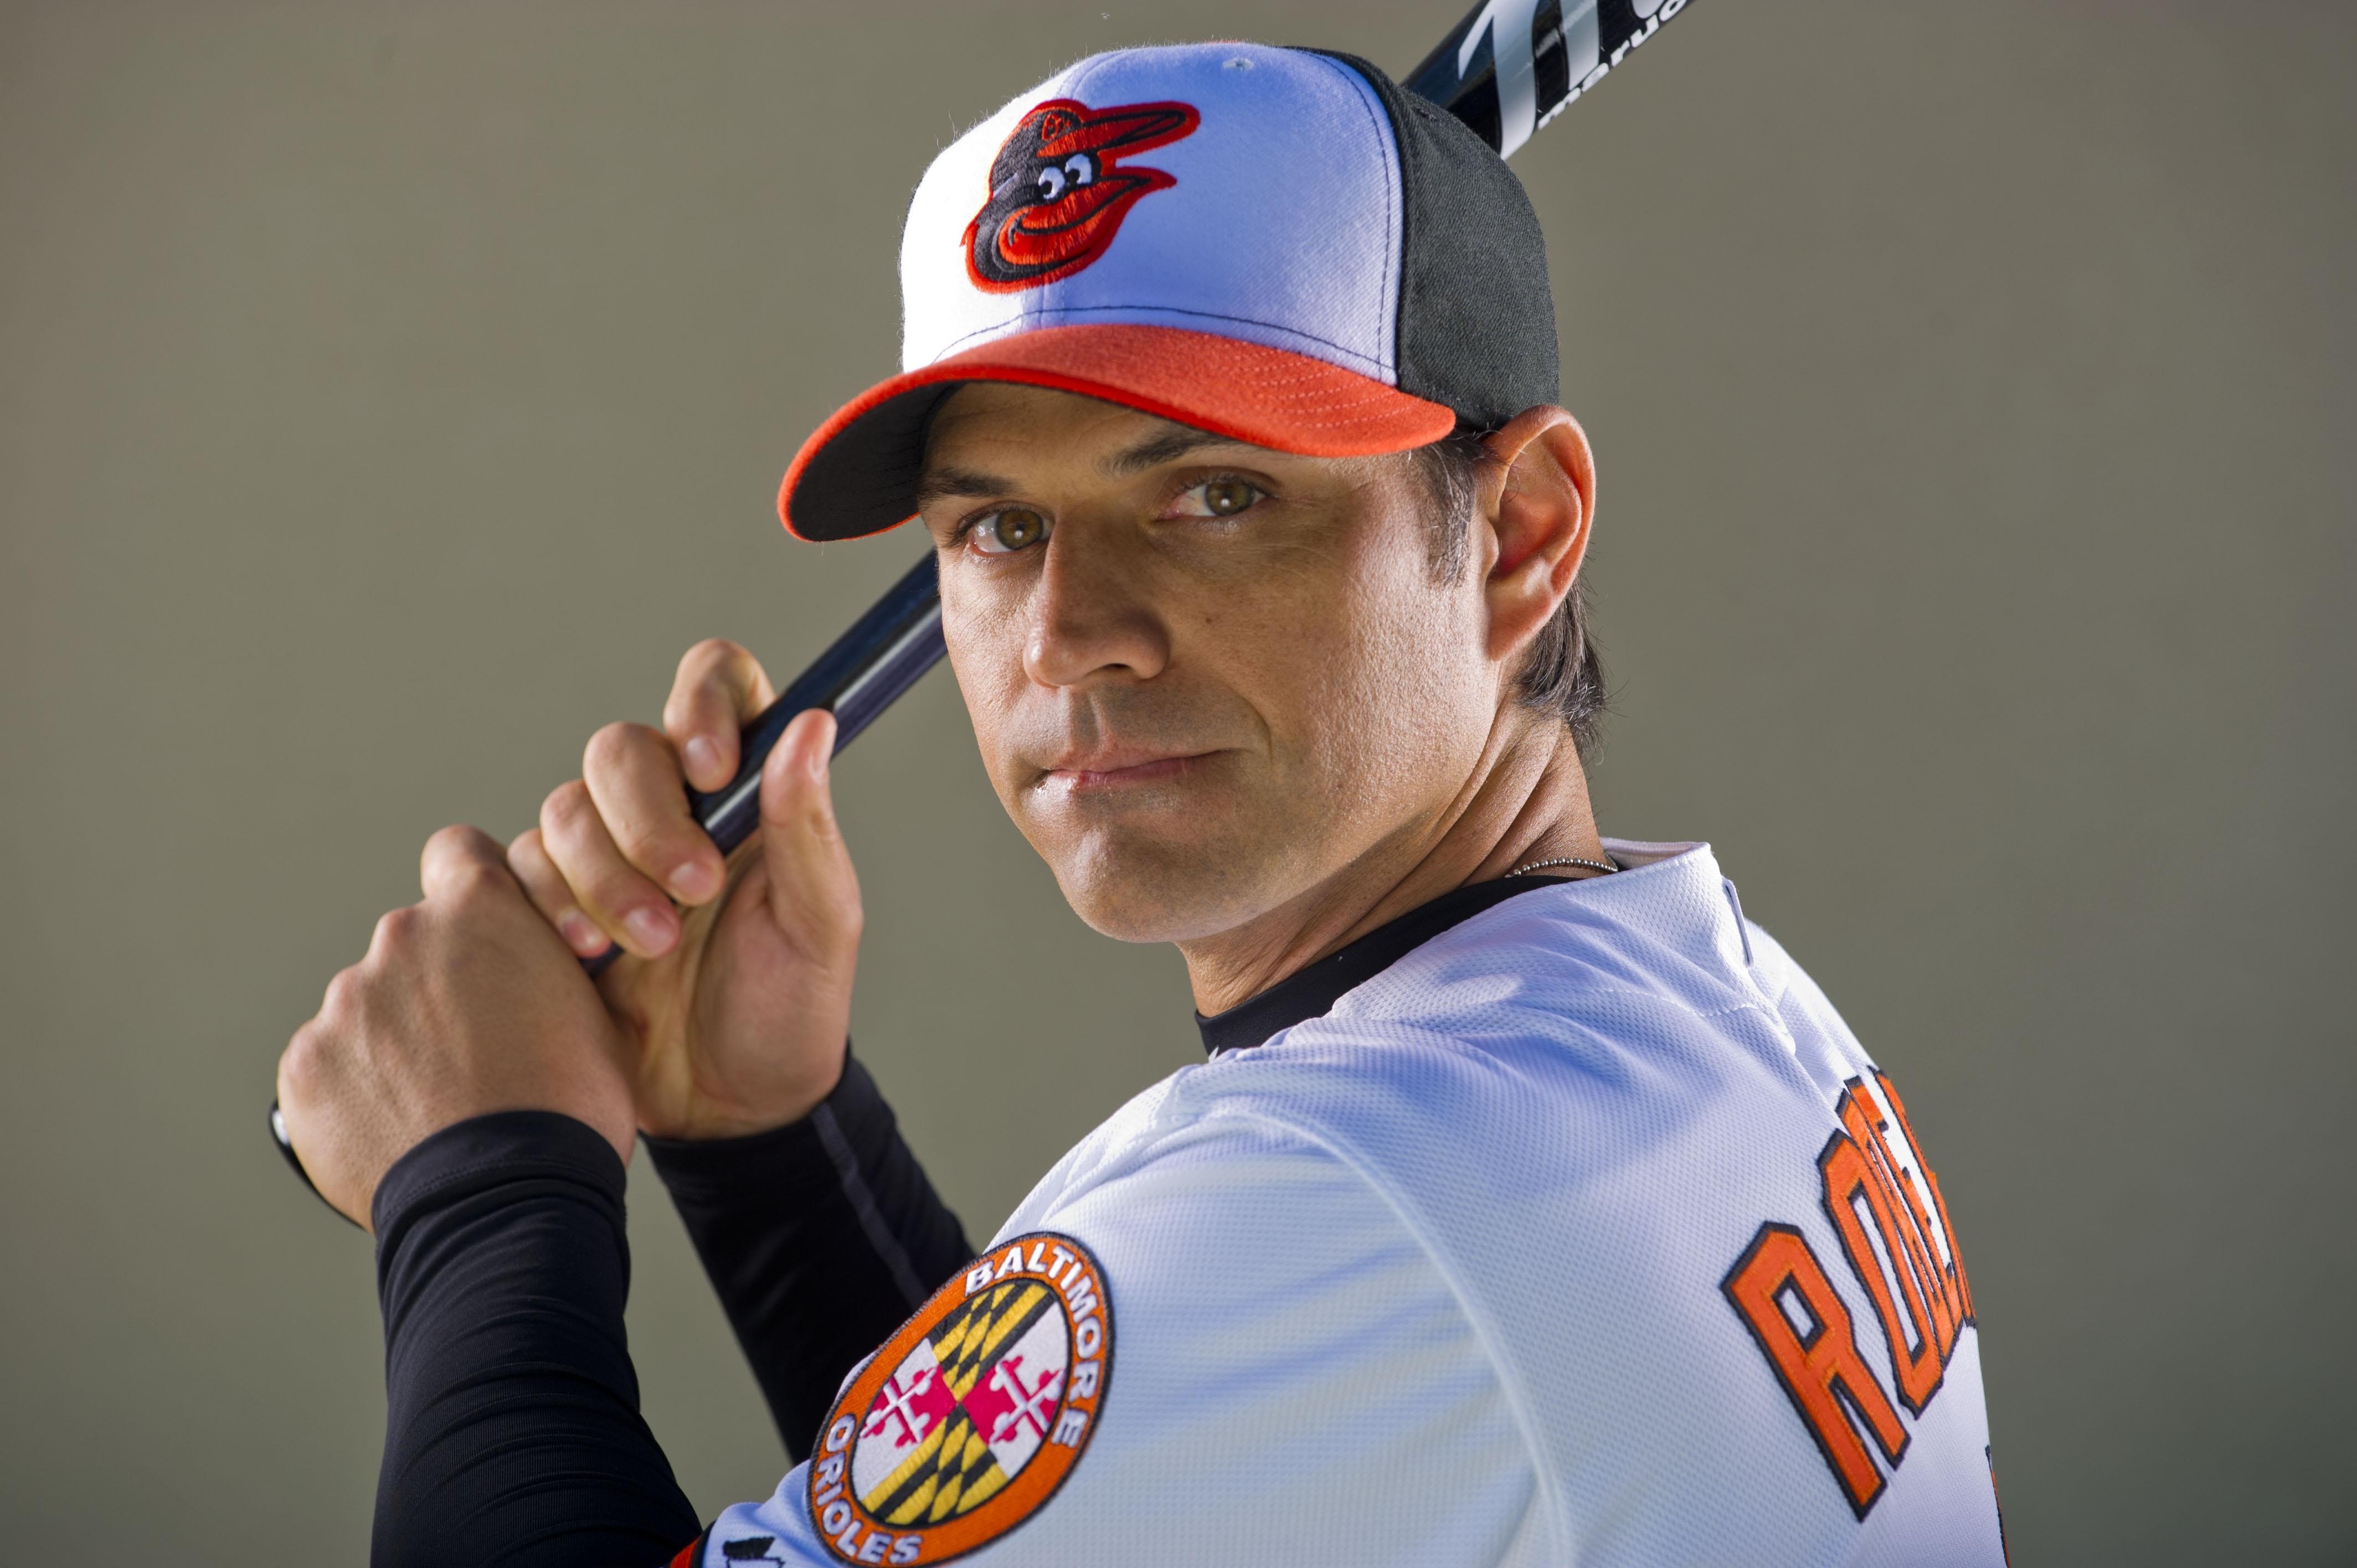 Baltimore Orioles infielder Brian Roberts poses for a portrait at the Sarasota Sports Complex Thu, Mar. 1, 2012.